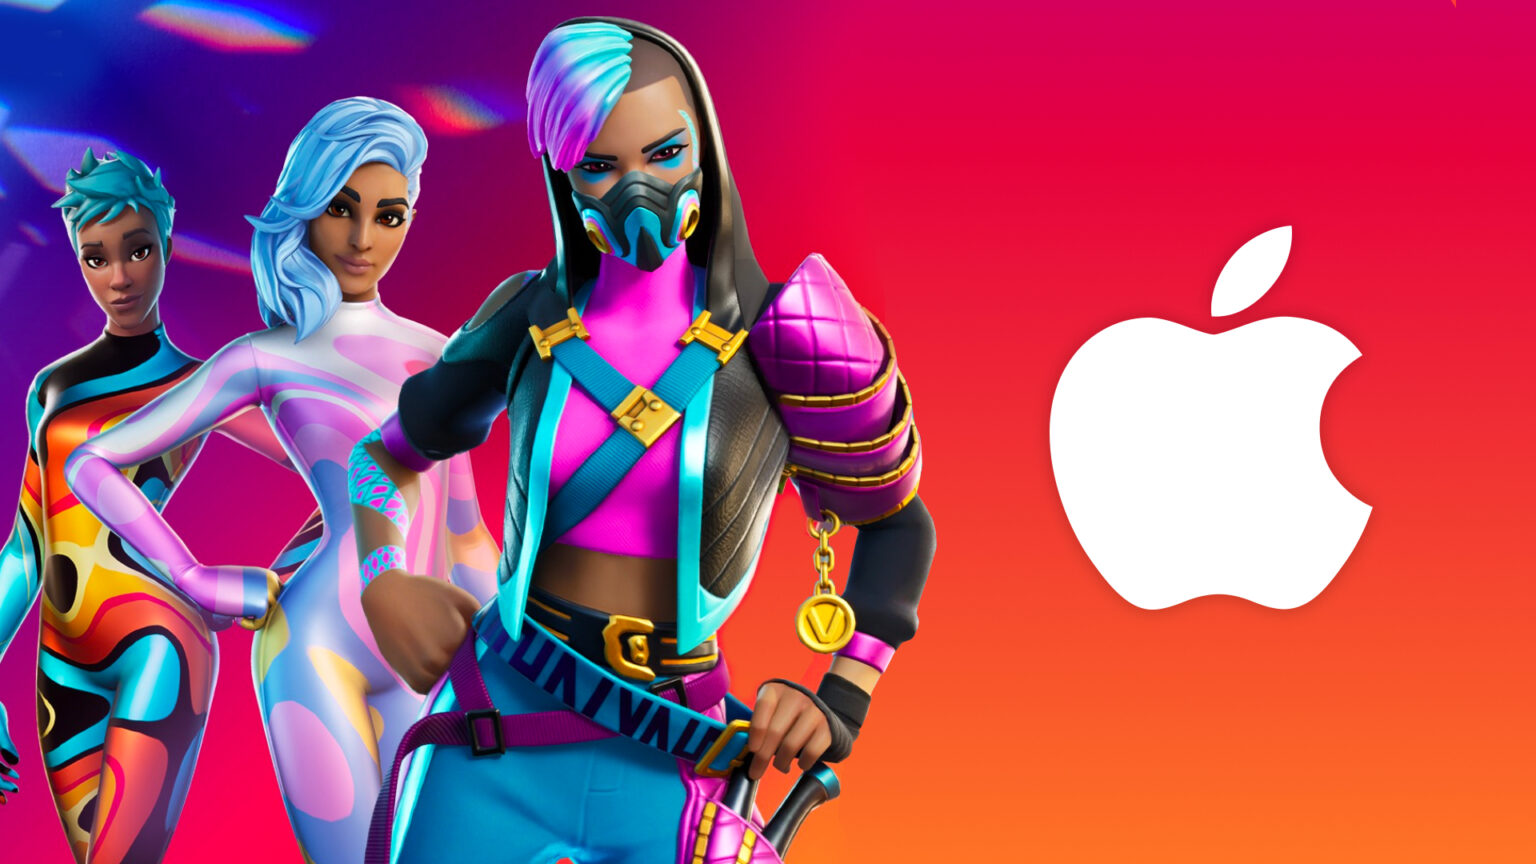 Apple and Epic Games are facing off in a legal showdown that could have long-lasting consequences for copyright. Here's the tea on the app that started it.